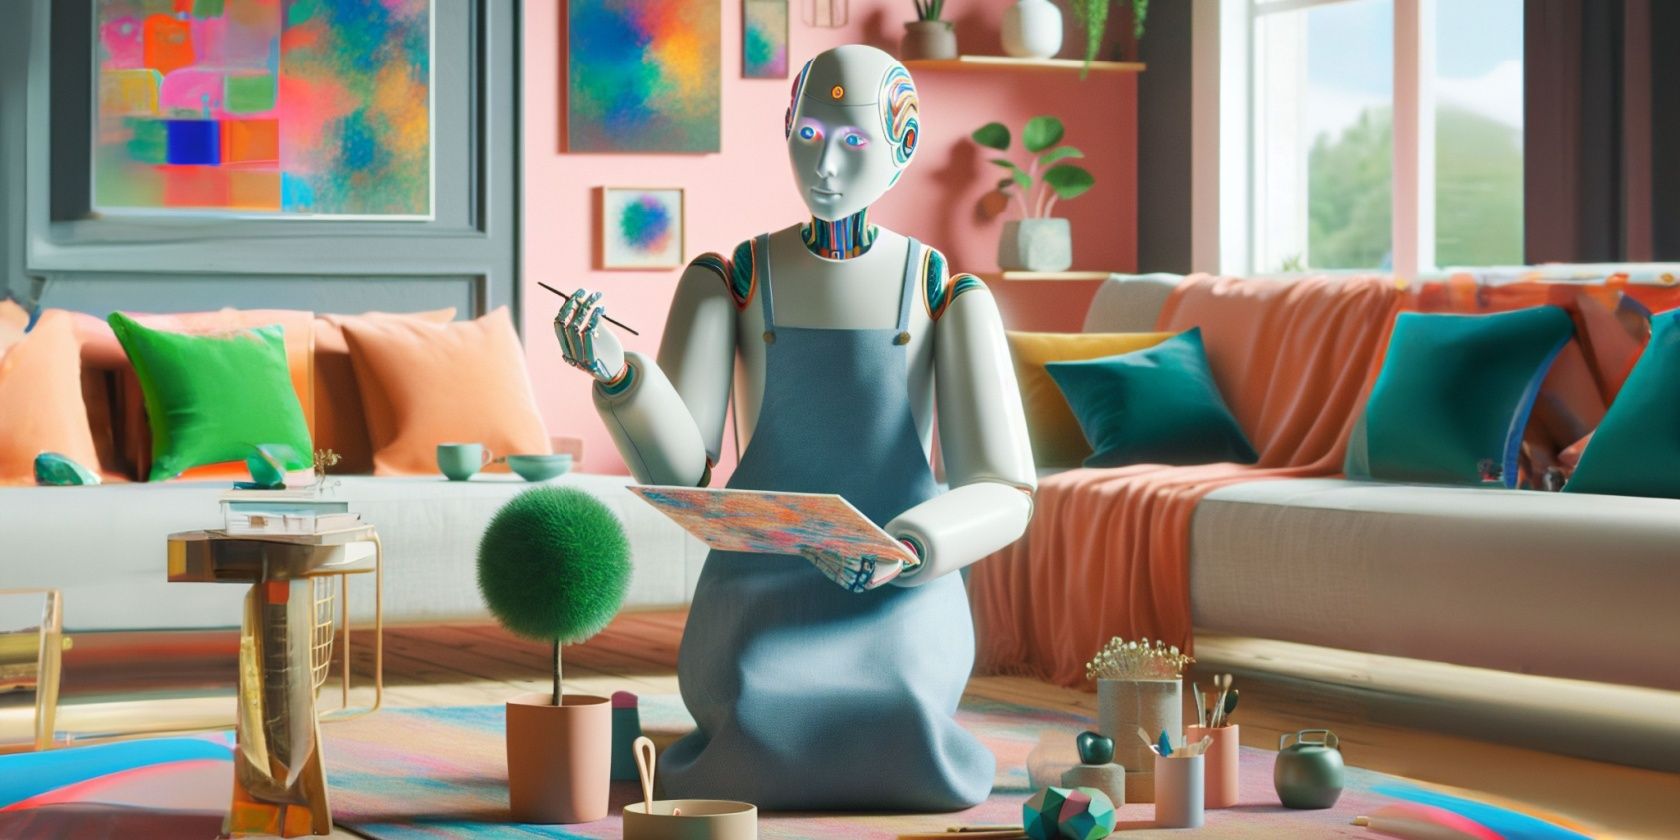 Robot Kneeling and Painting in Colorful Room